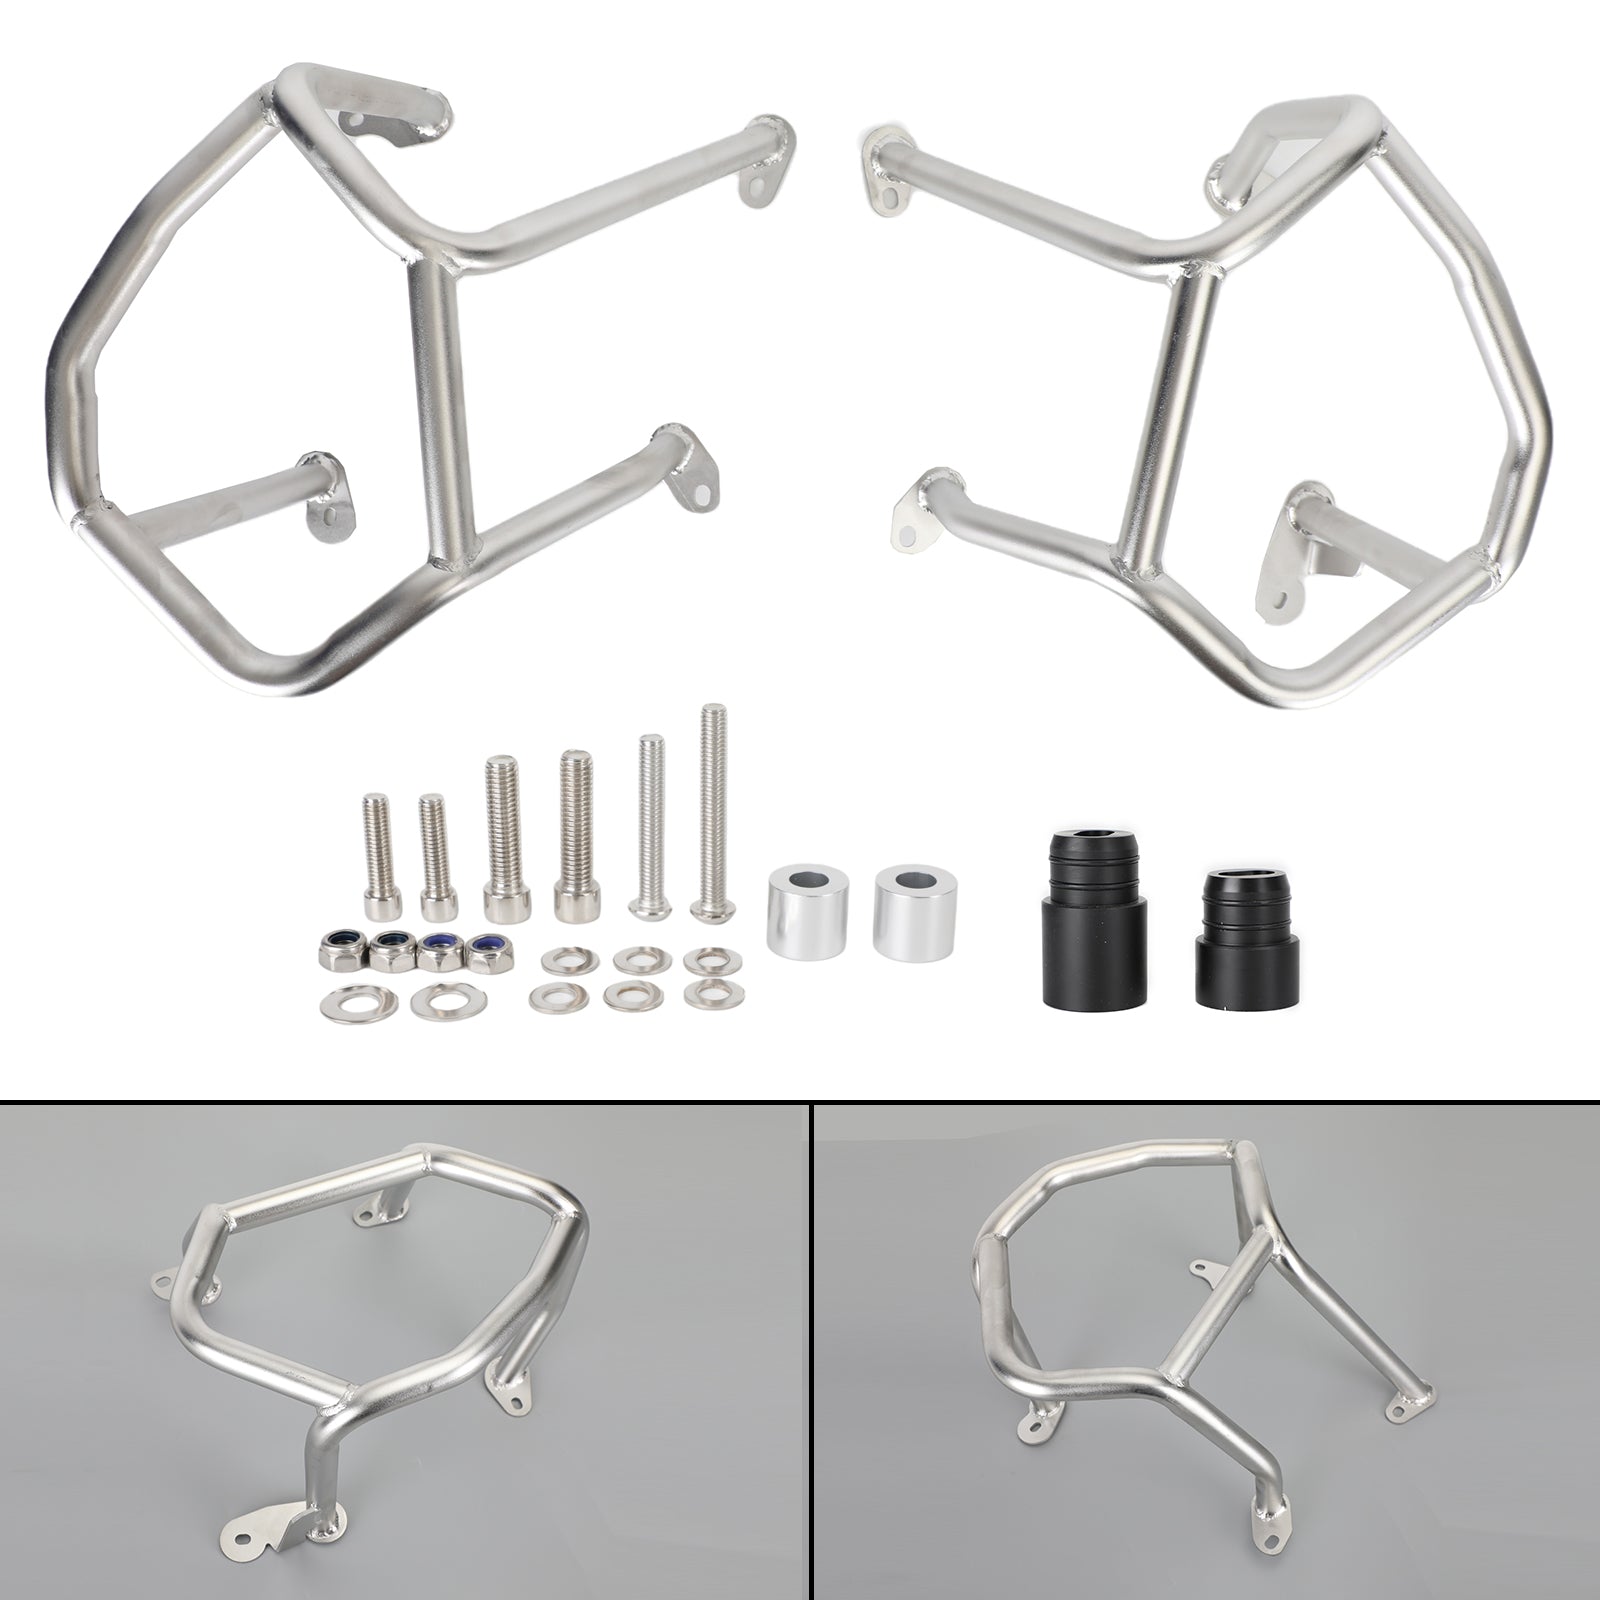 Lower Engine Protector Guards Crash Bars Silver Fit For Bmw R1250Gs 18-21 19 20